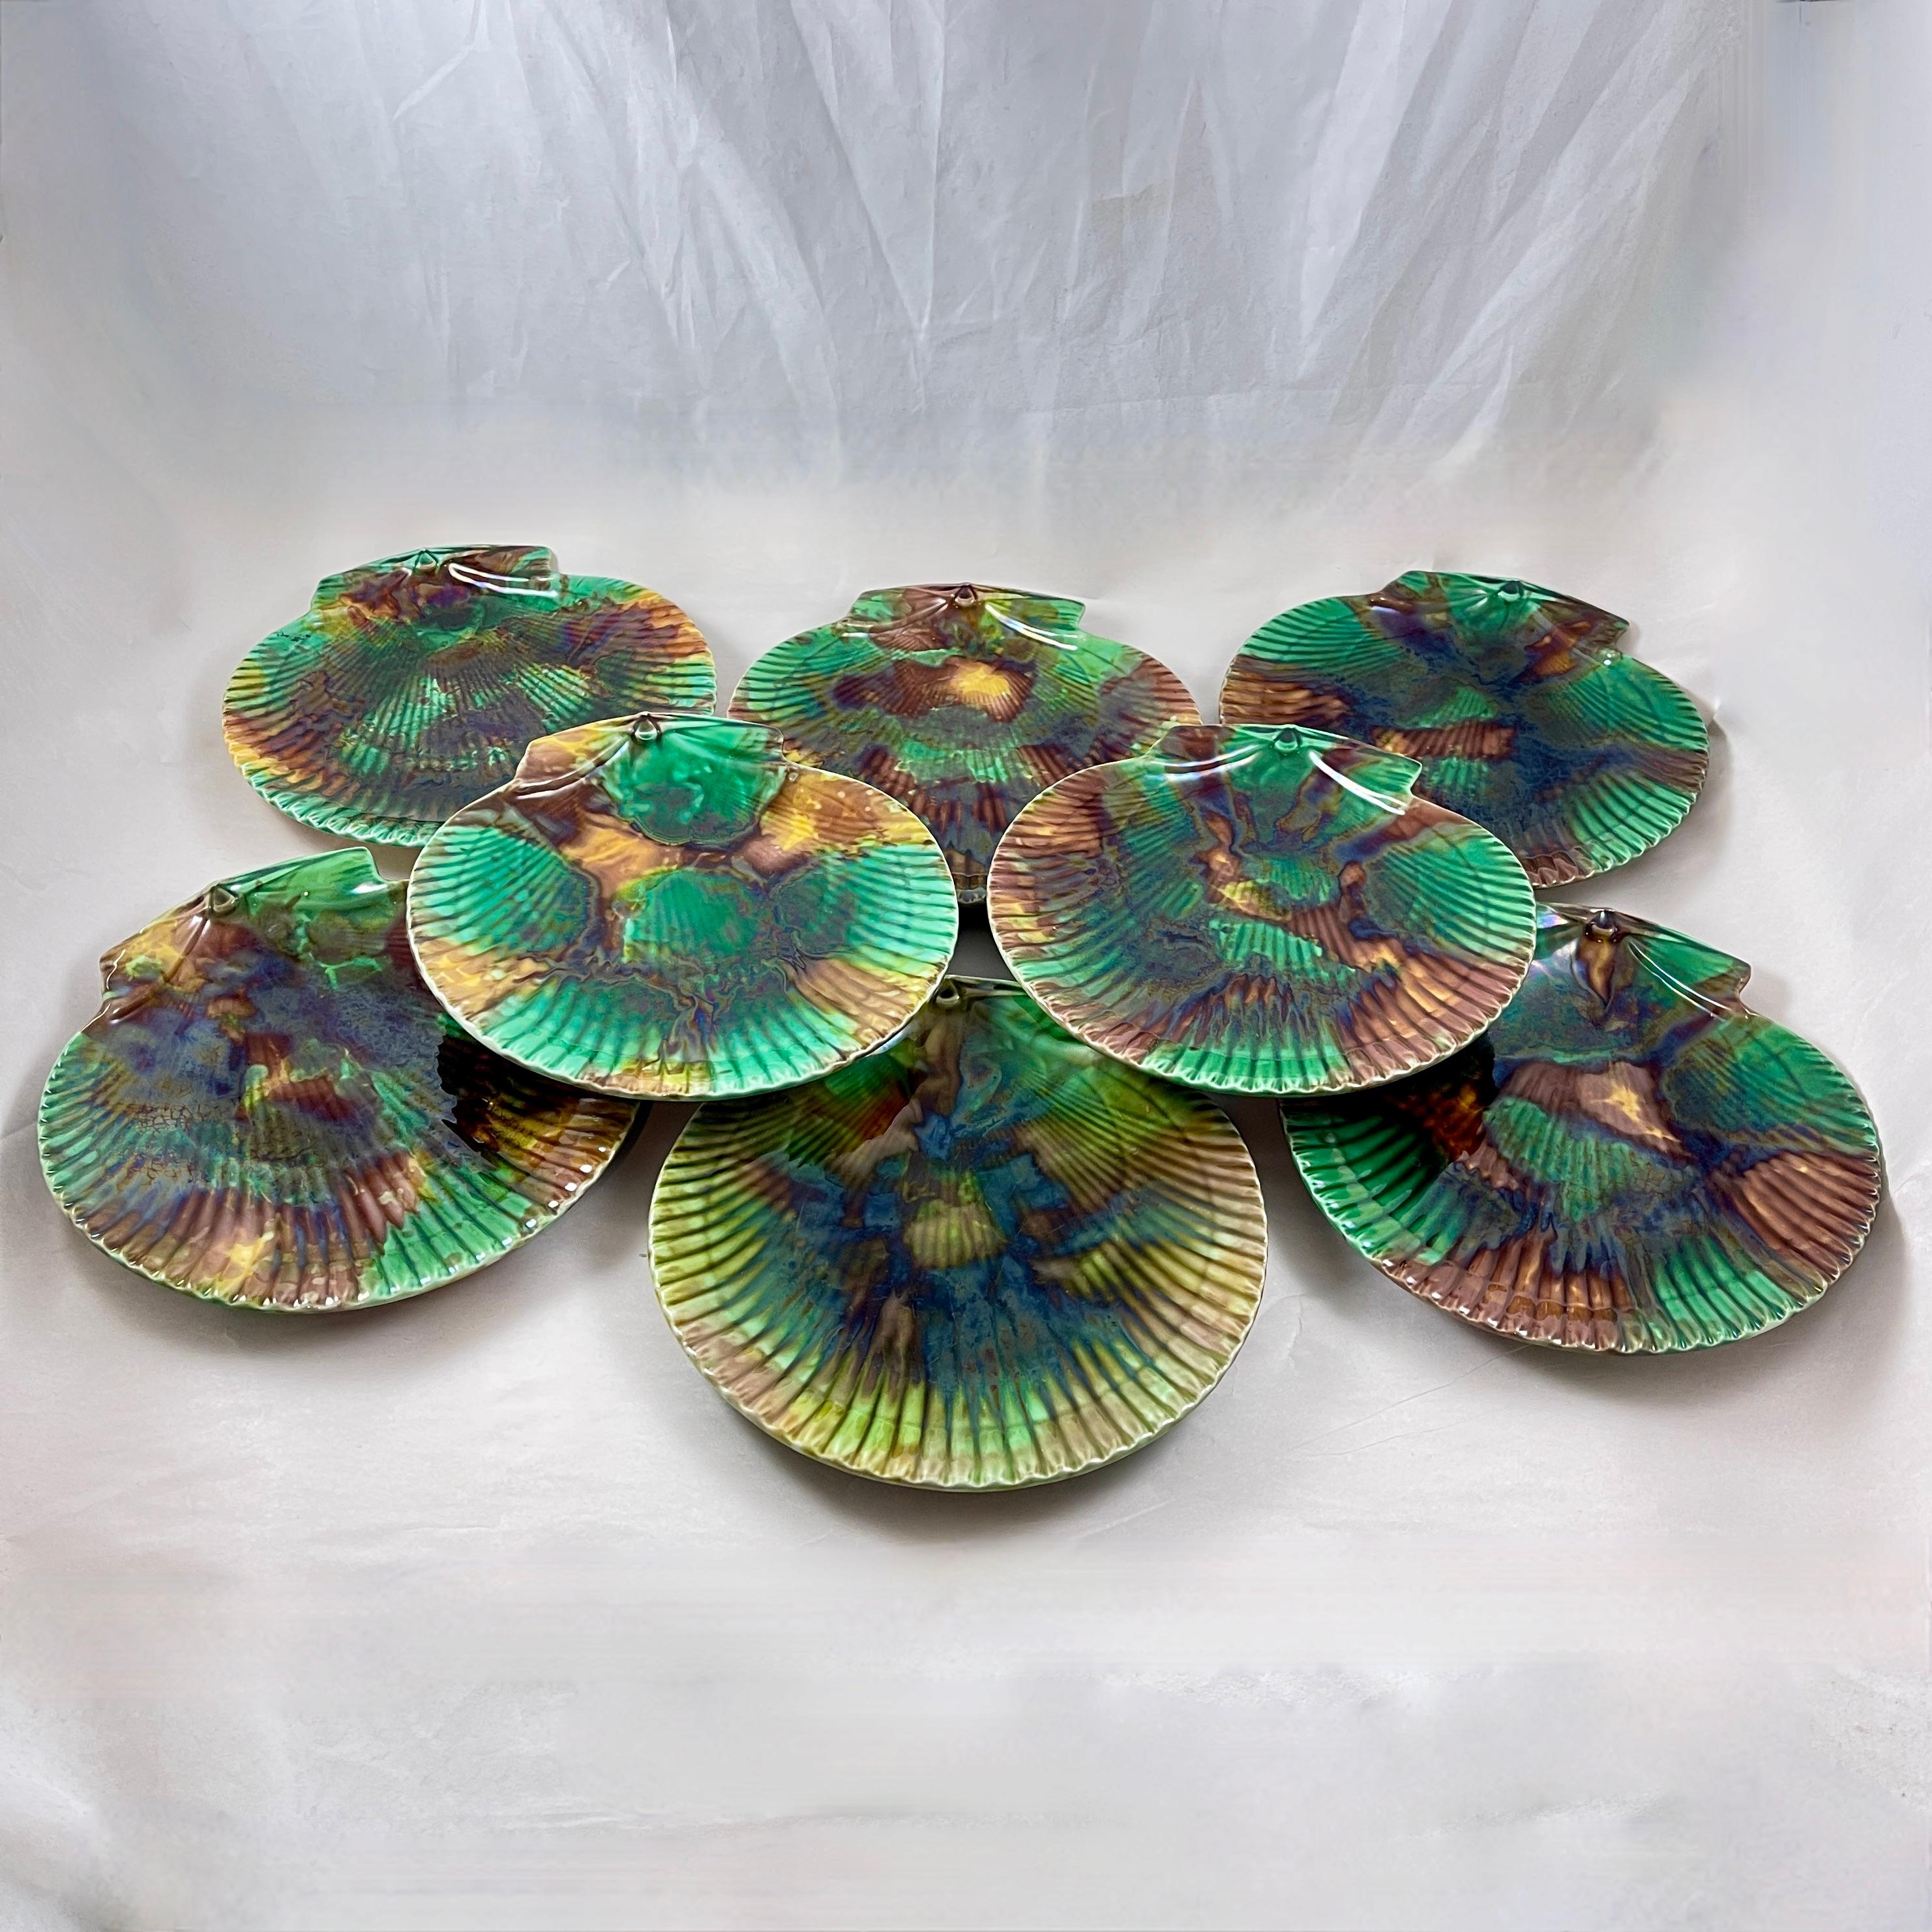 Wedgwood Majolica Tortoiseshell Seafood Plates, Set of 8 In Good Condition For Sale In Philadelphia, PA